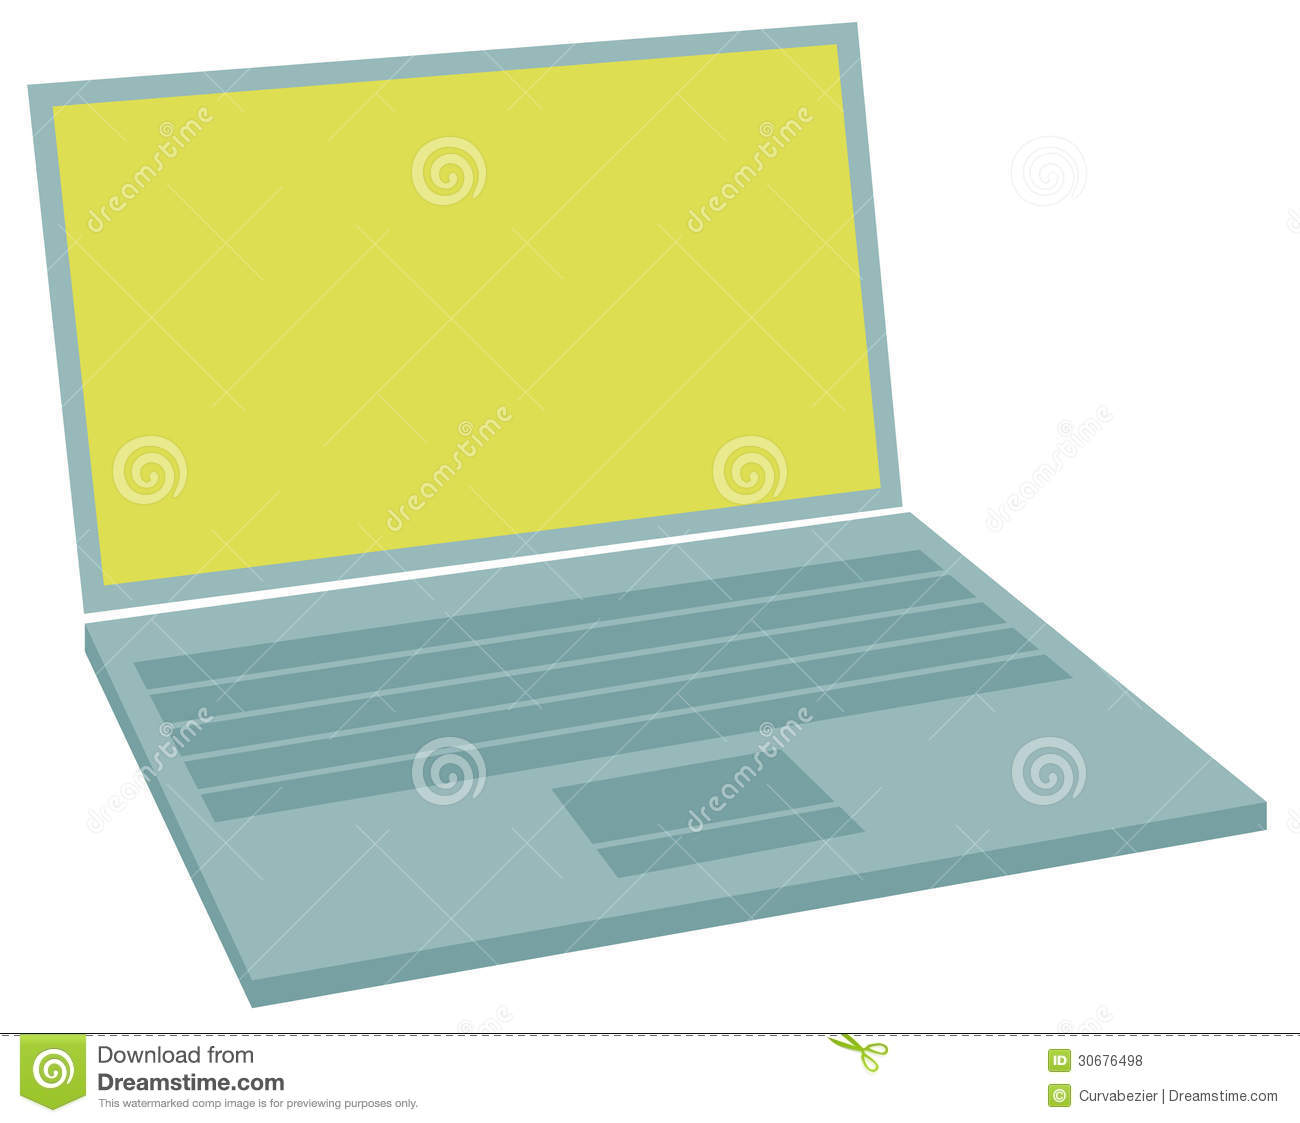 Royalty Free Images Computer Laptop